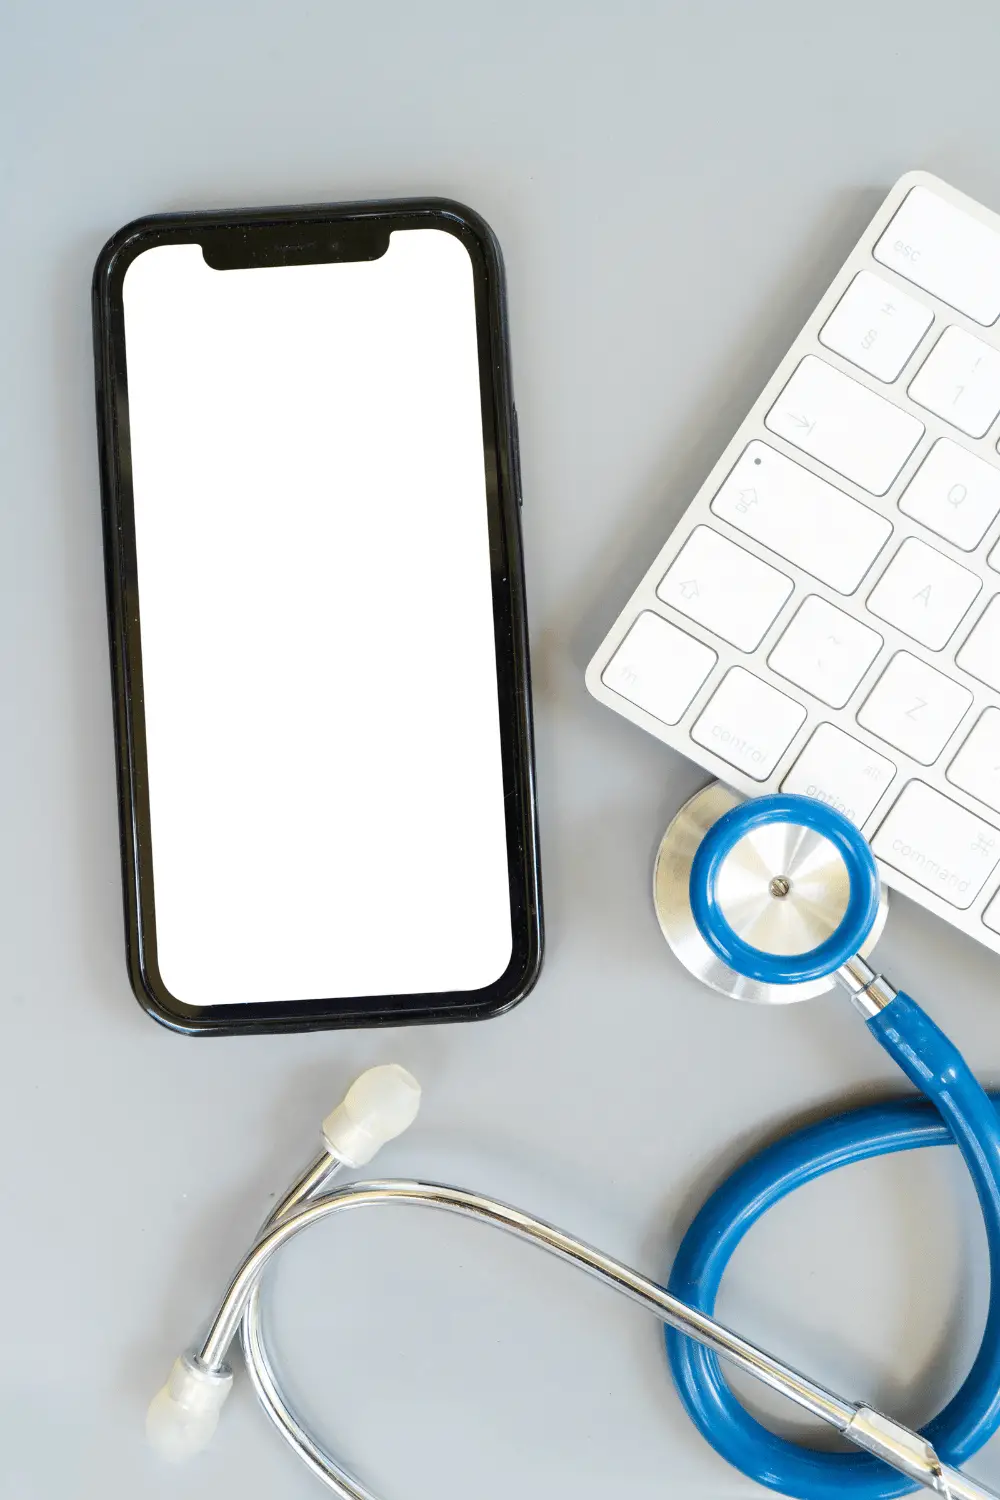 Personalized Medical Advice: GP Phone Consultation for Individualized Care